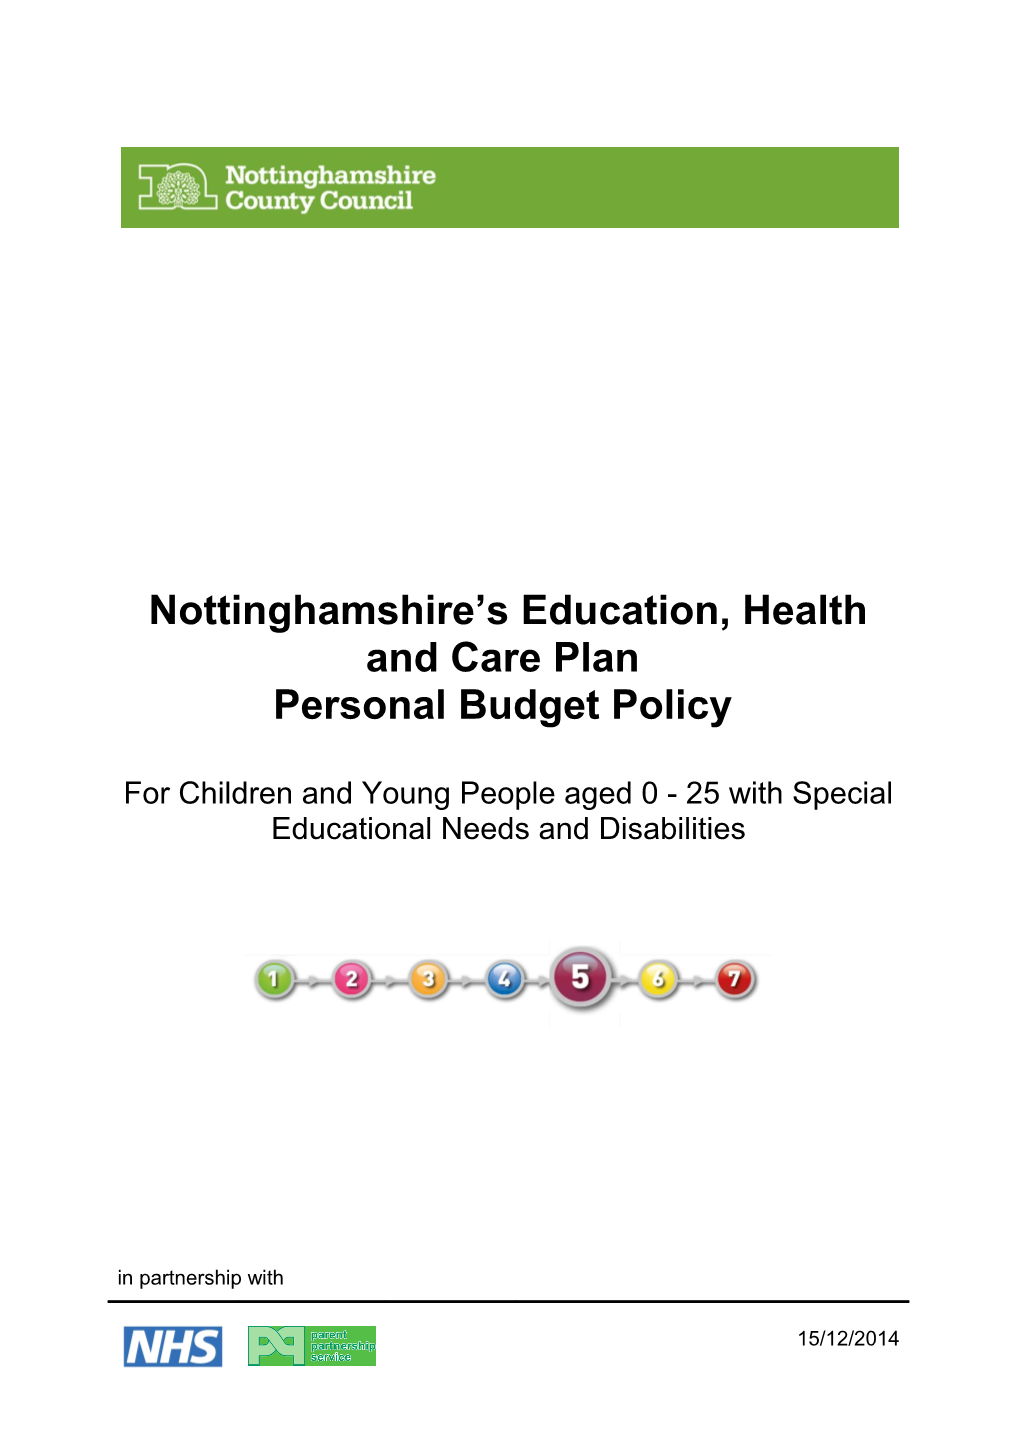 Nottinghamshire S Education, Health and Care Plan